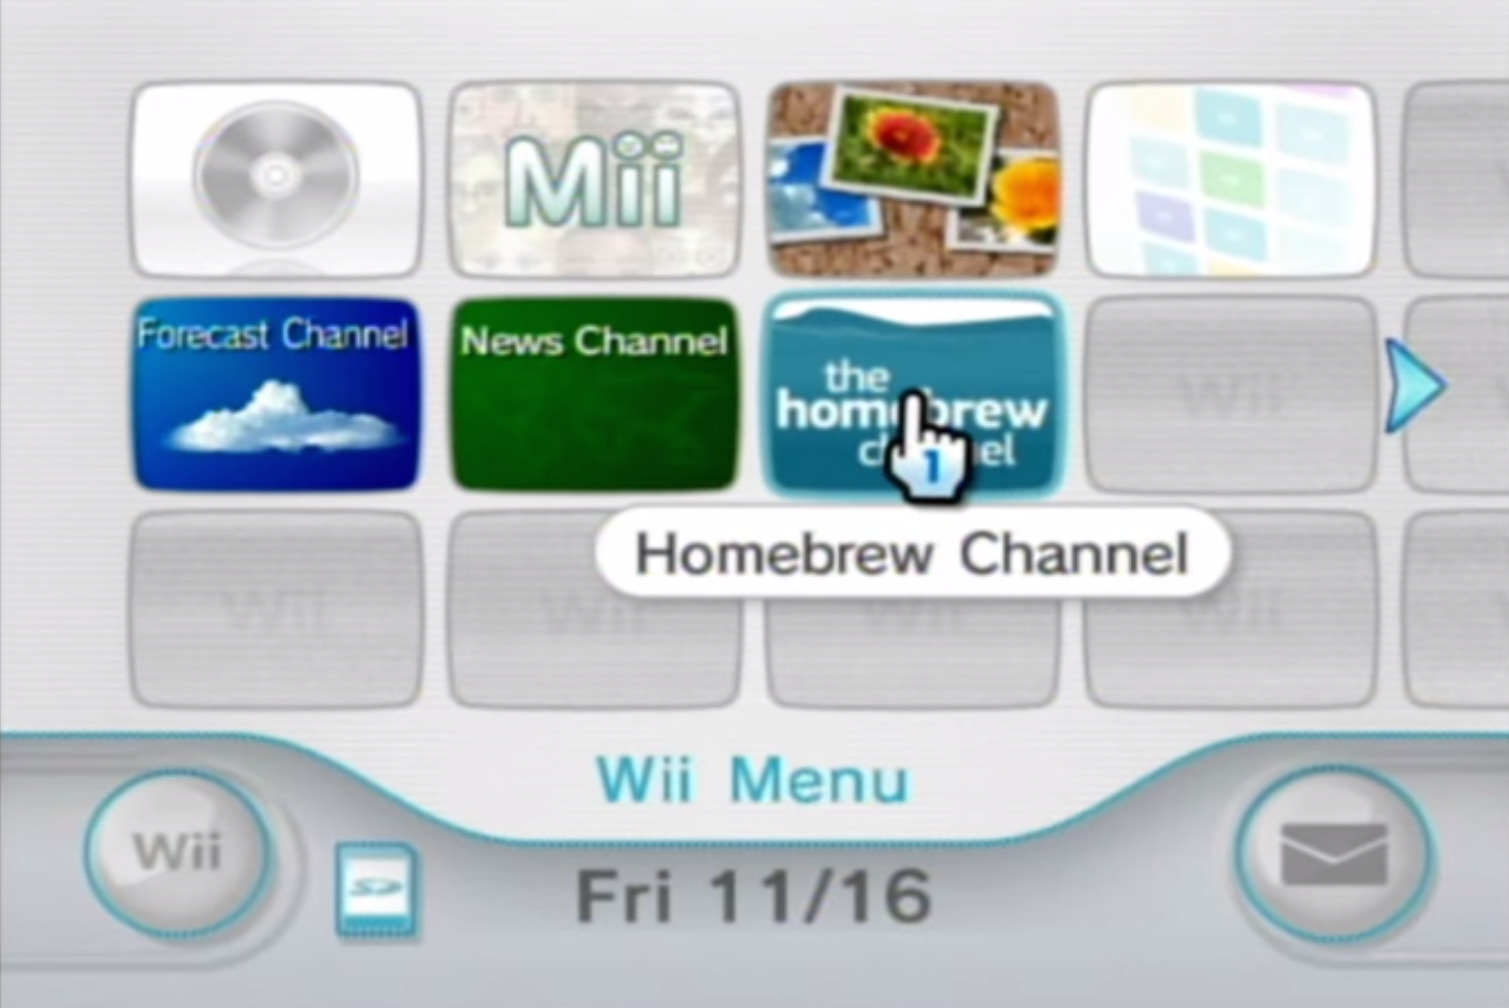 You might not know it, but the Wii U might be the most hackable game consol...